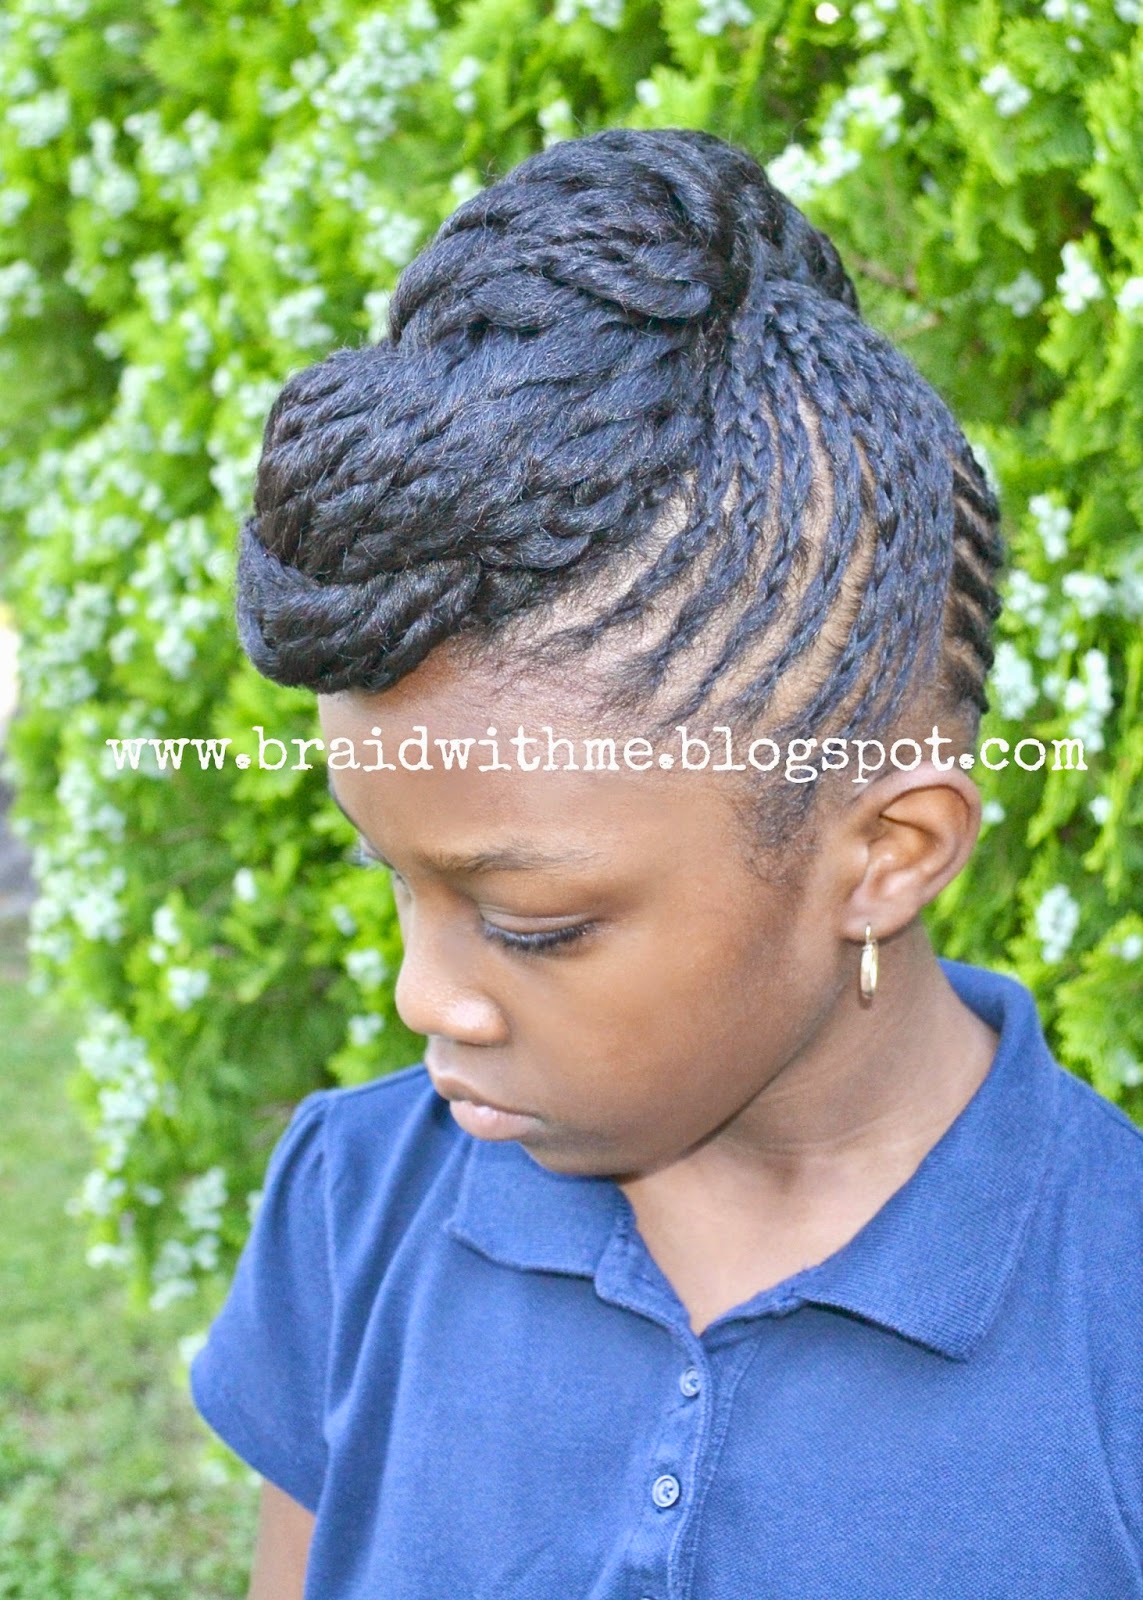 Braid with Me: An All Natural Updo: Inspired by...